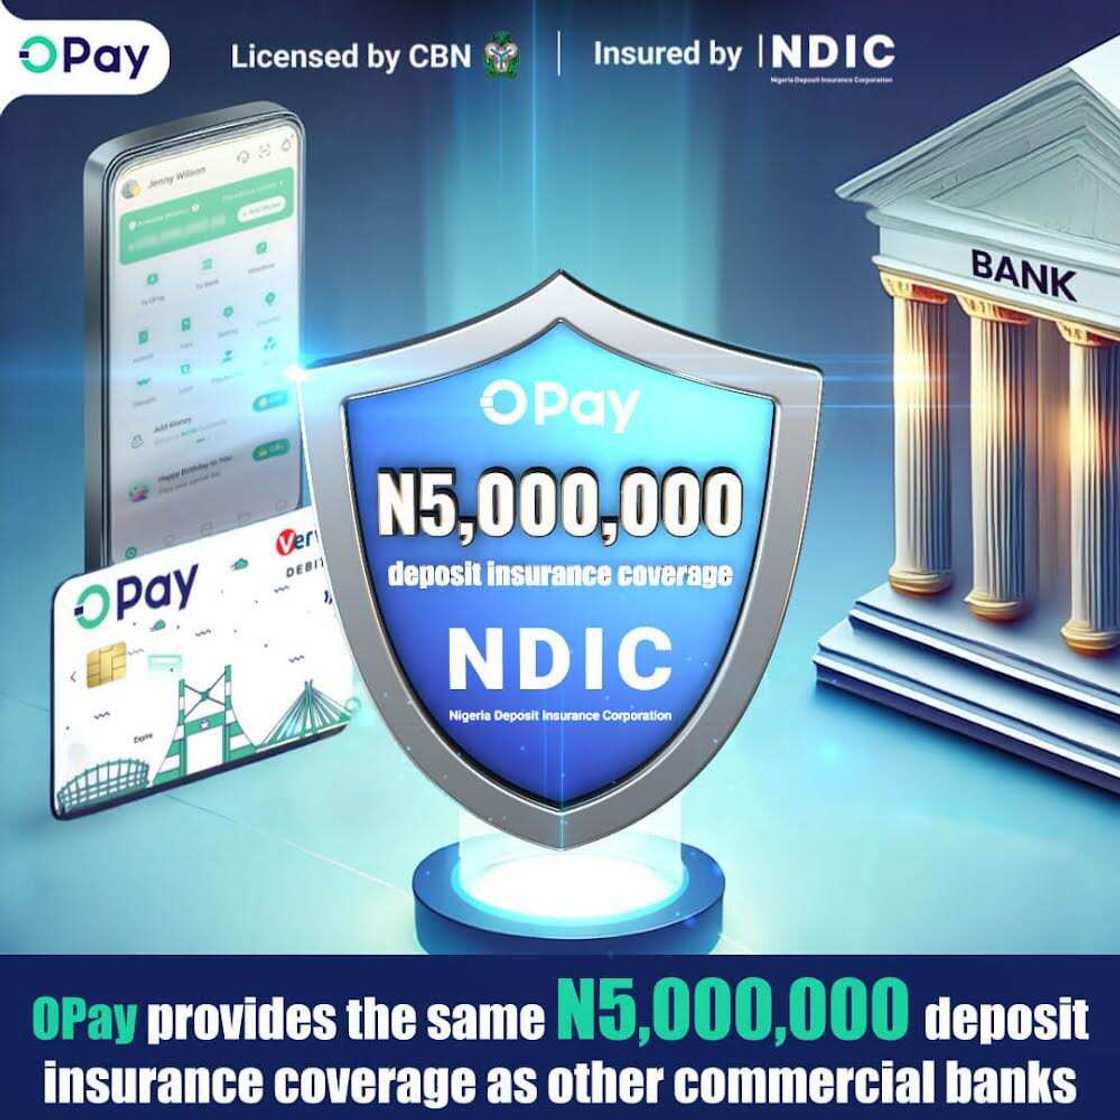 OPay users’ funds now insured up to N5 million under NDIC